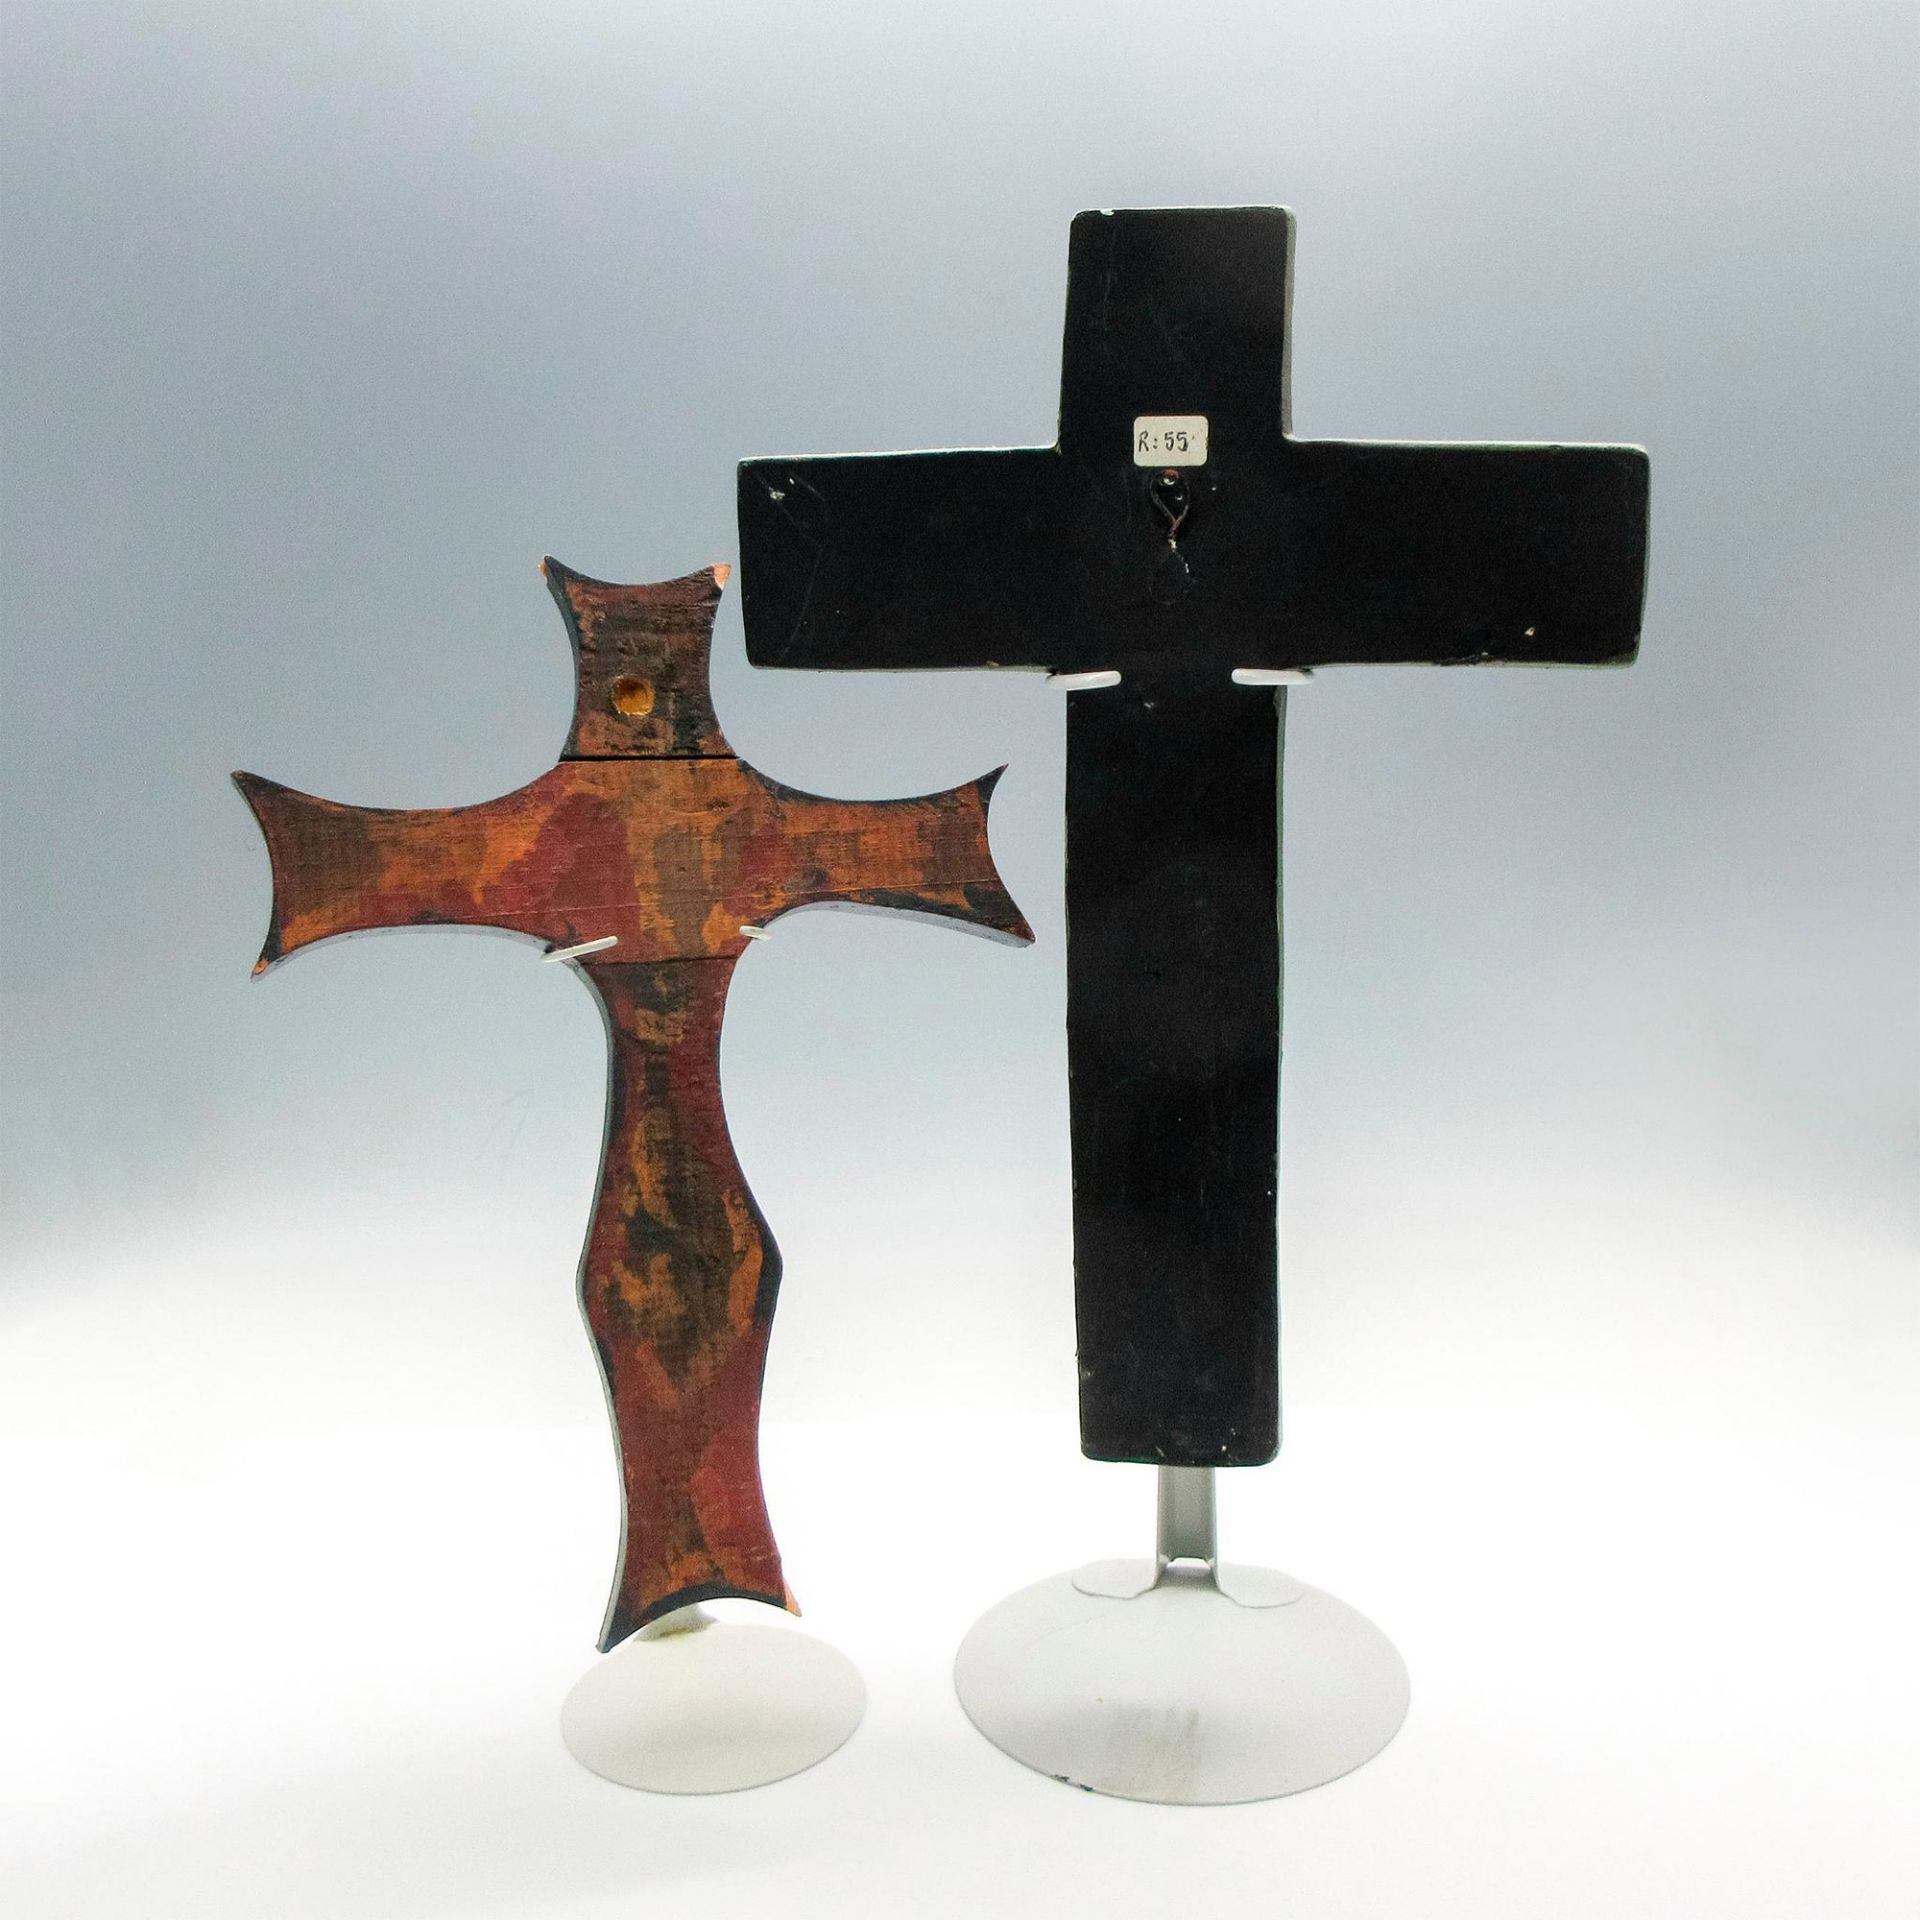 2pc Religious Ceramic and Wood Wall Crosses - Image 2 of 2